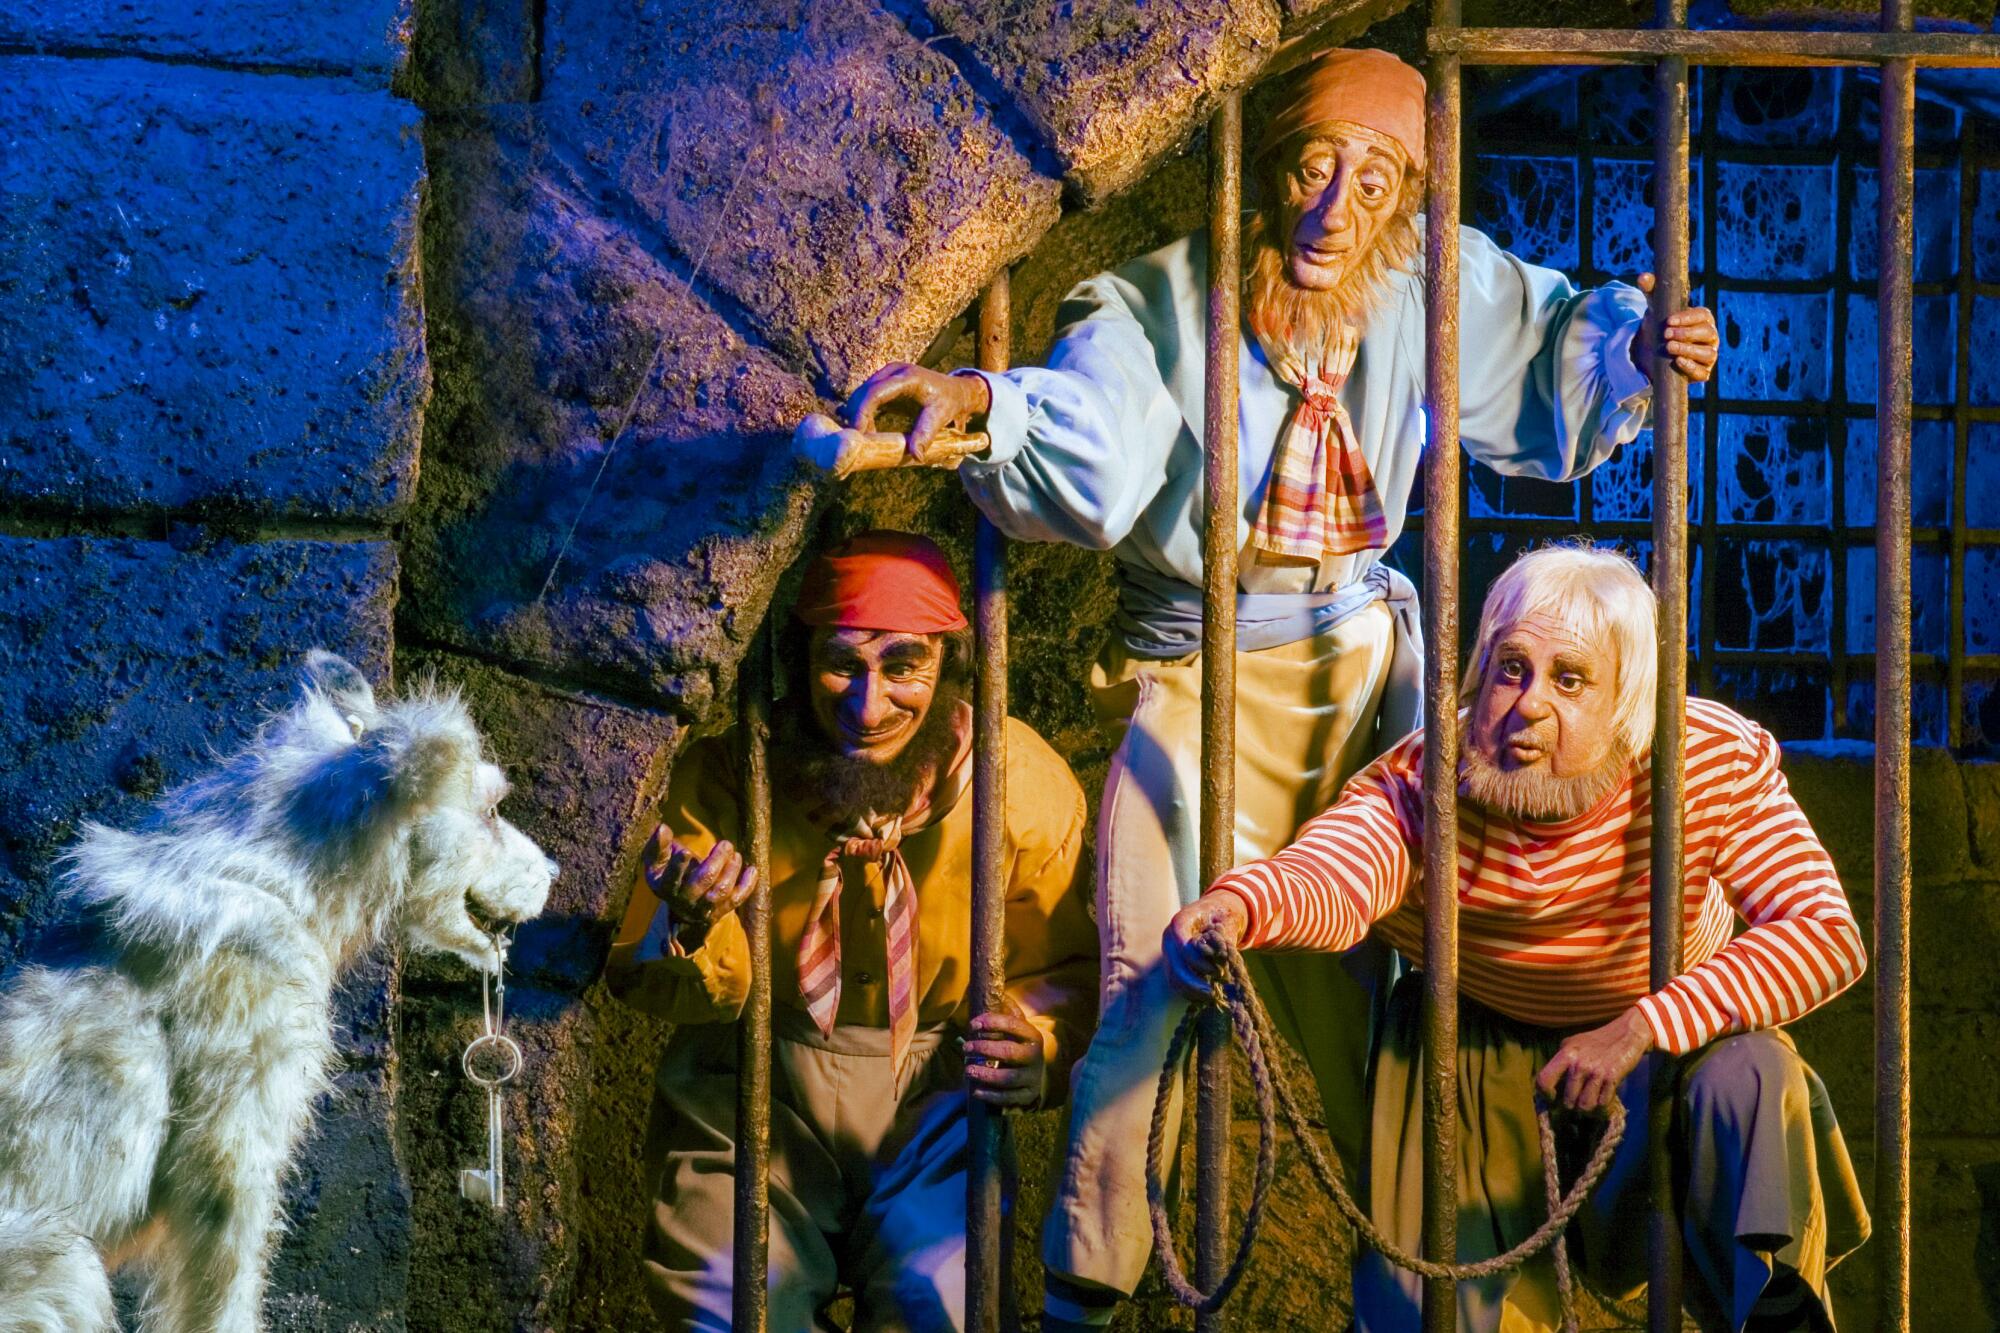 Audio-animatronic pirates on the Pirates of the Caribbean ride in a jail cell trying to lure a dog holding the key.